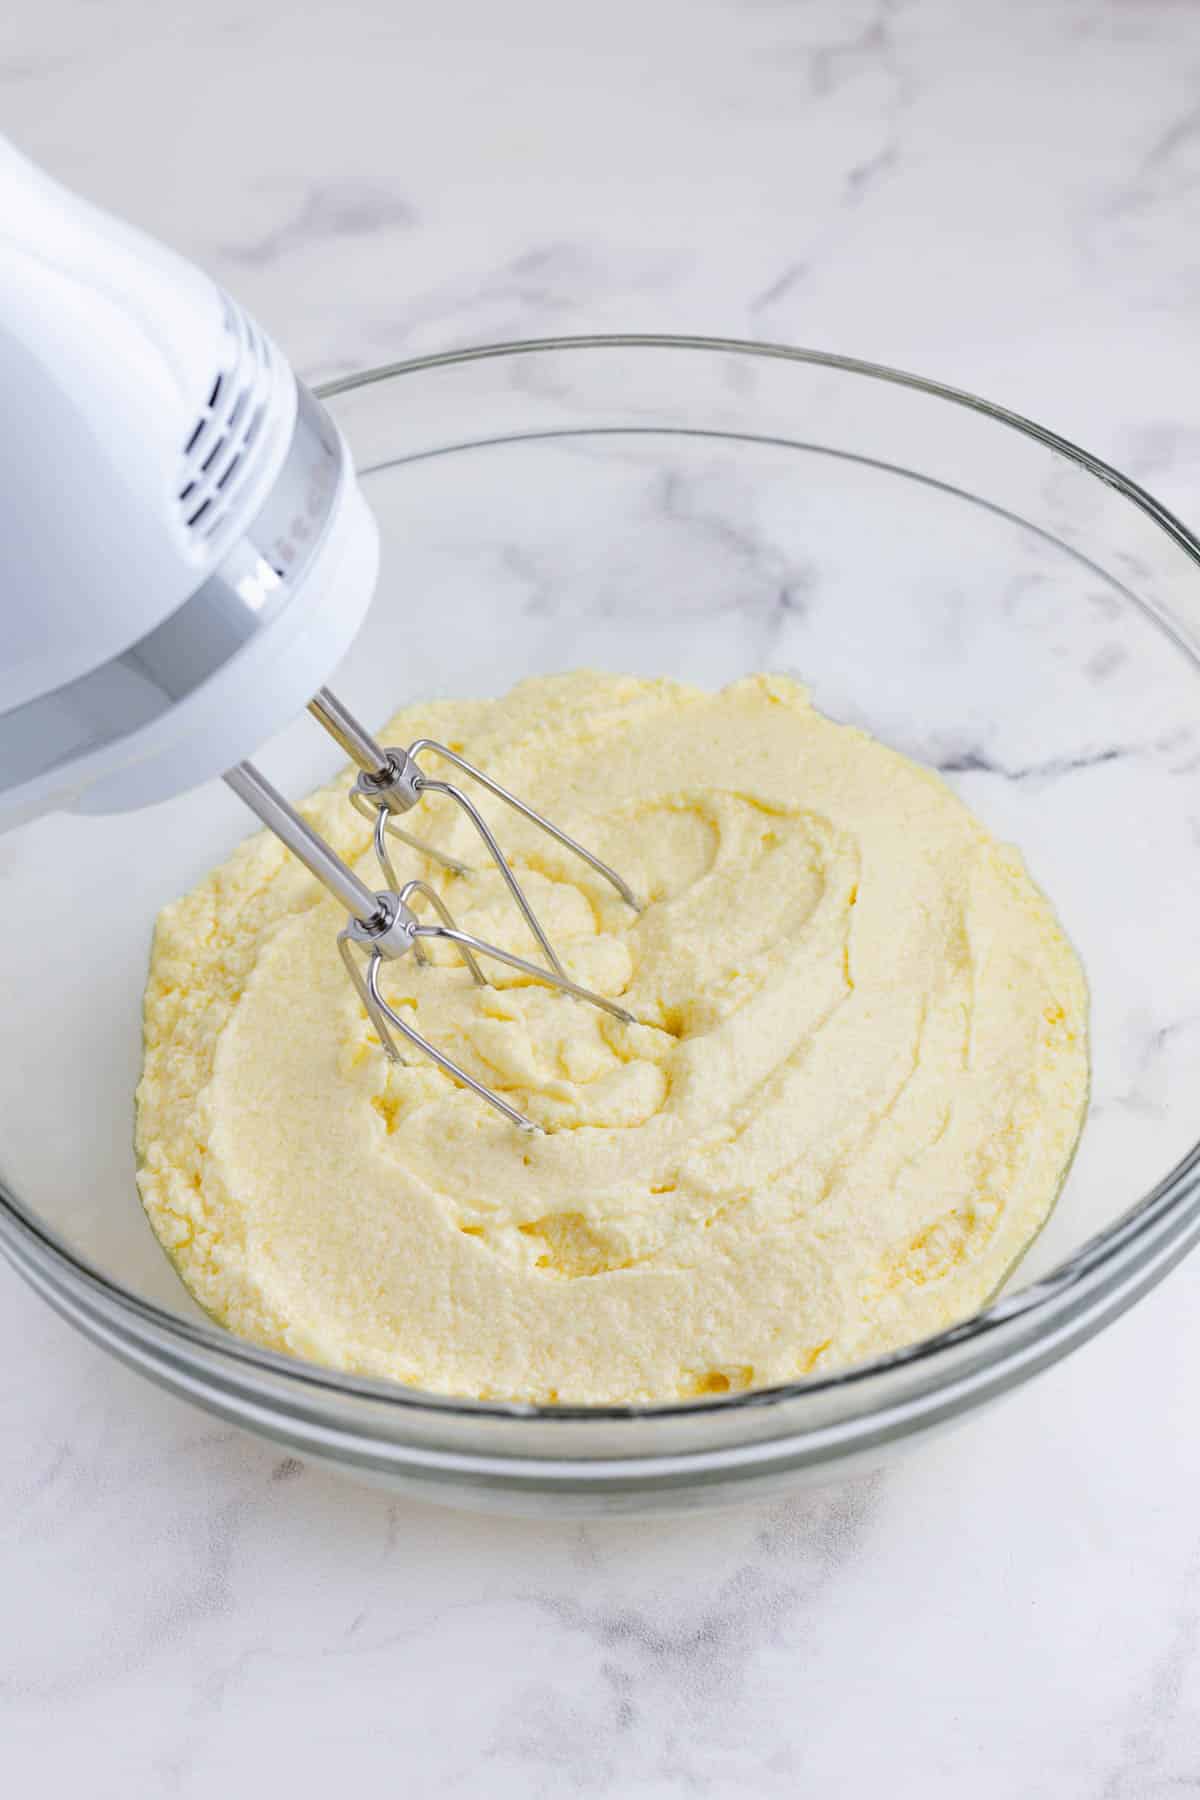 A handmixer beats together the eggs and butter mixture.